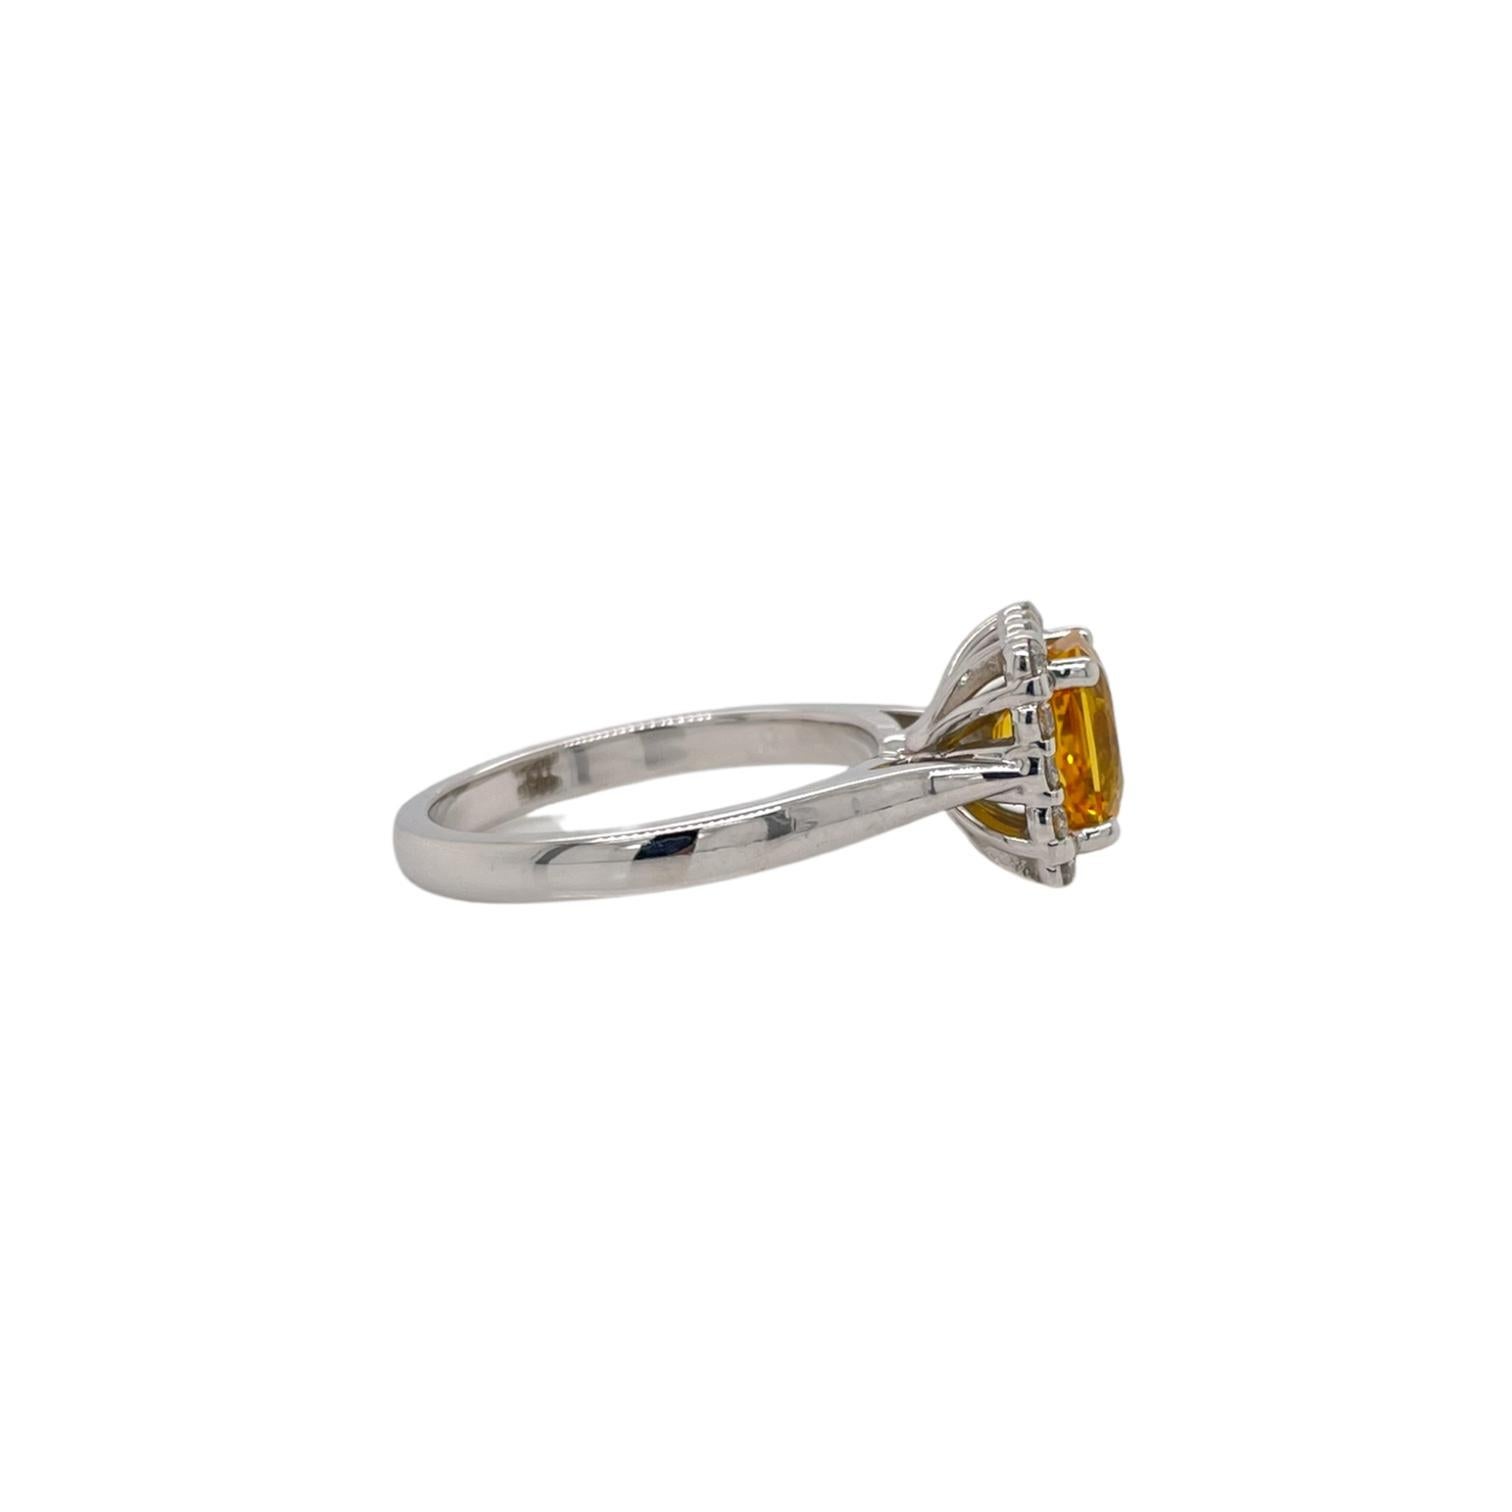 Ring contains one radiant cut yellow sapphire, 2.13ct and 18 round brilliant diamonds surrounding,  0.21tcw. Diamonds are G in color and VS2 in clarity. Stones are mounted in a handmade prong setting in 18k gold. Ring is a size 6 and can be resized